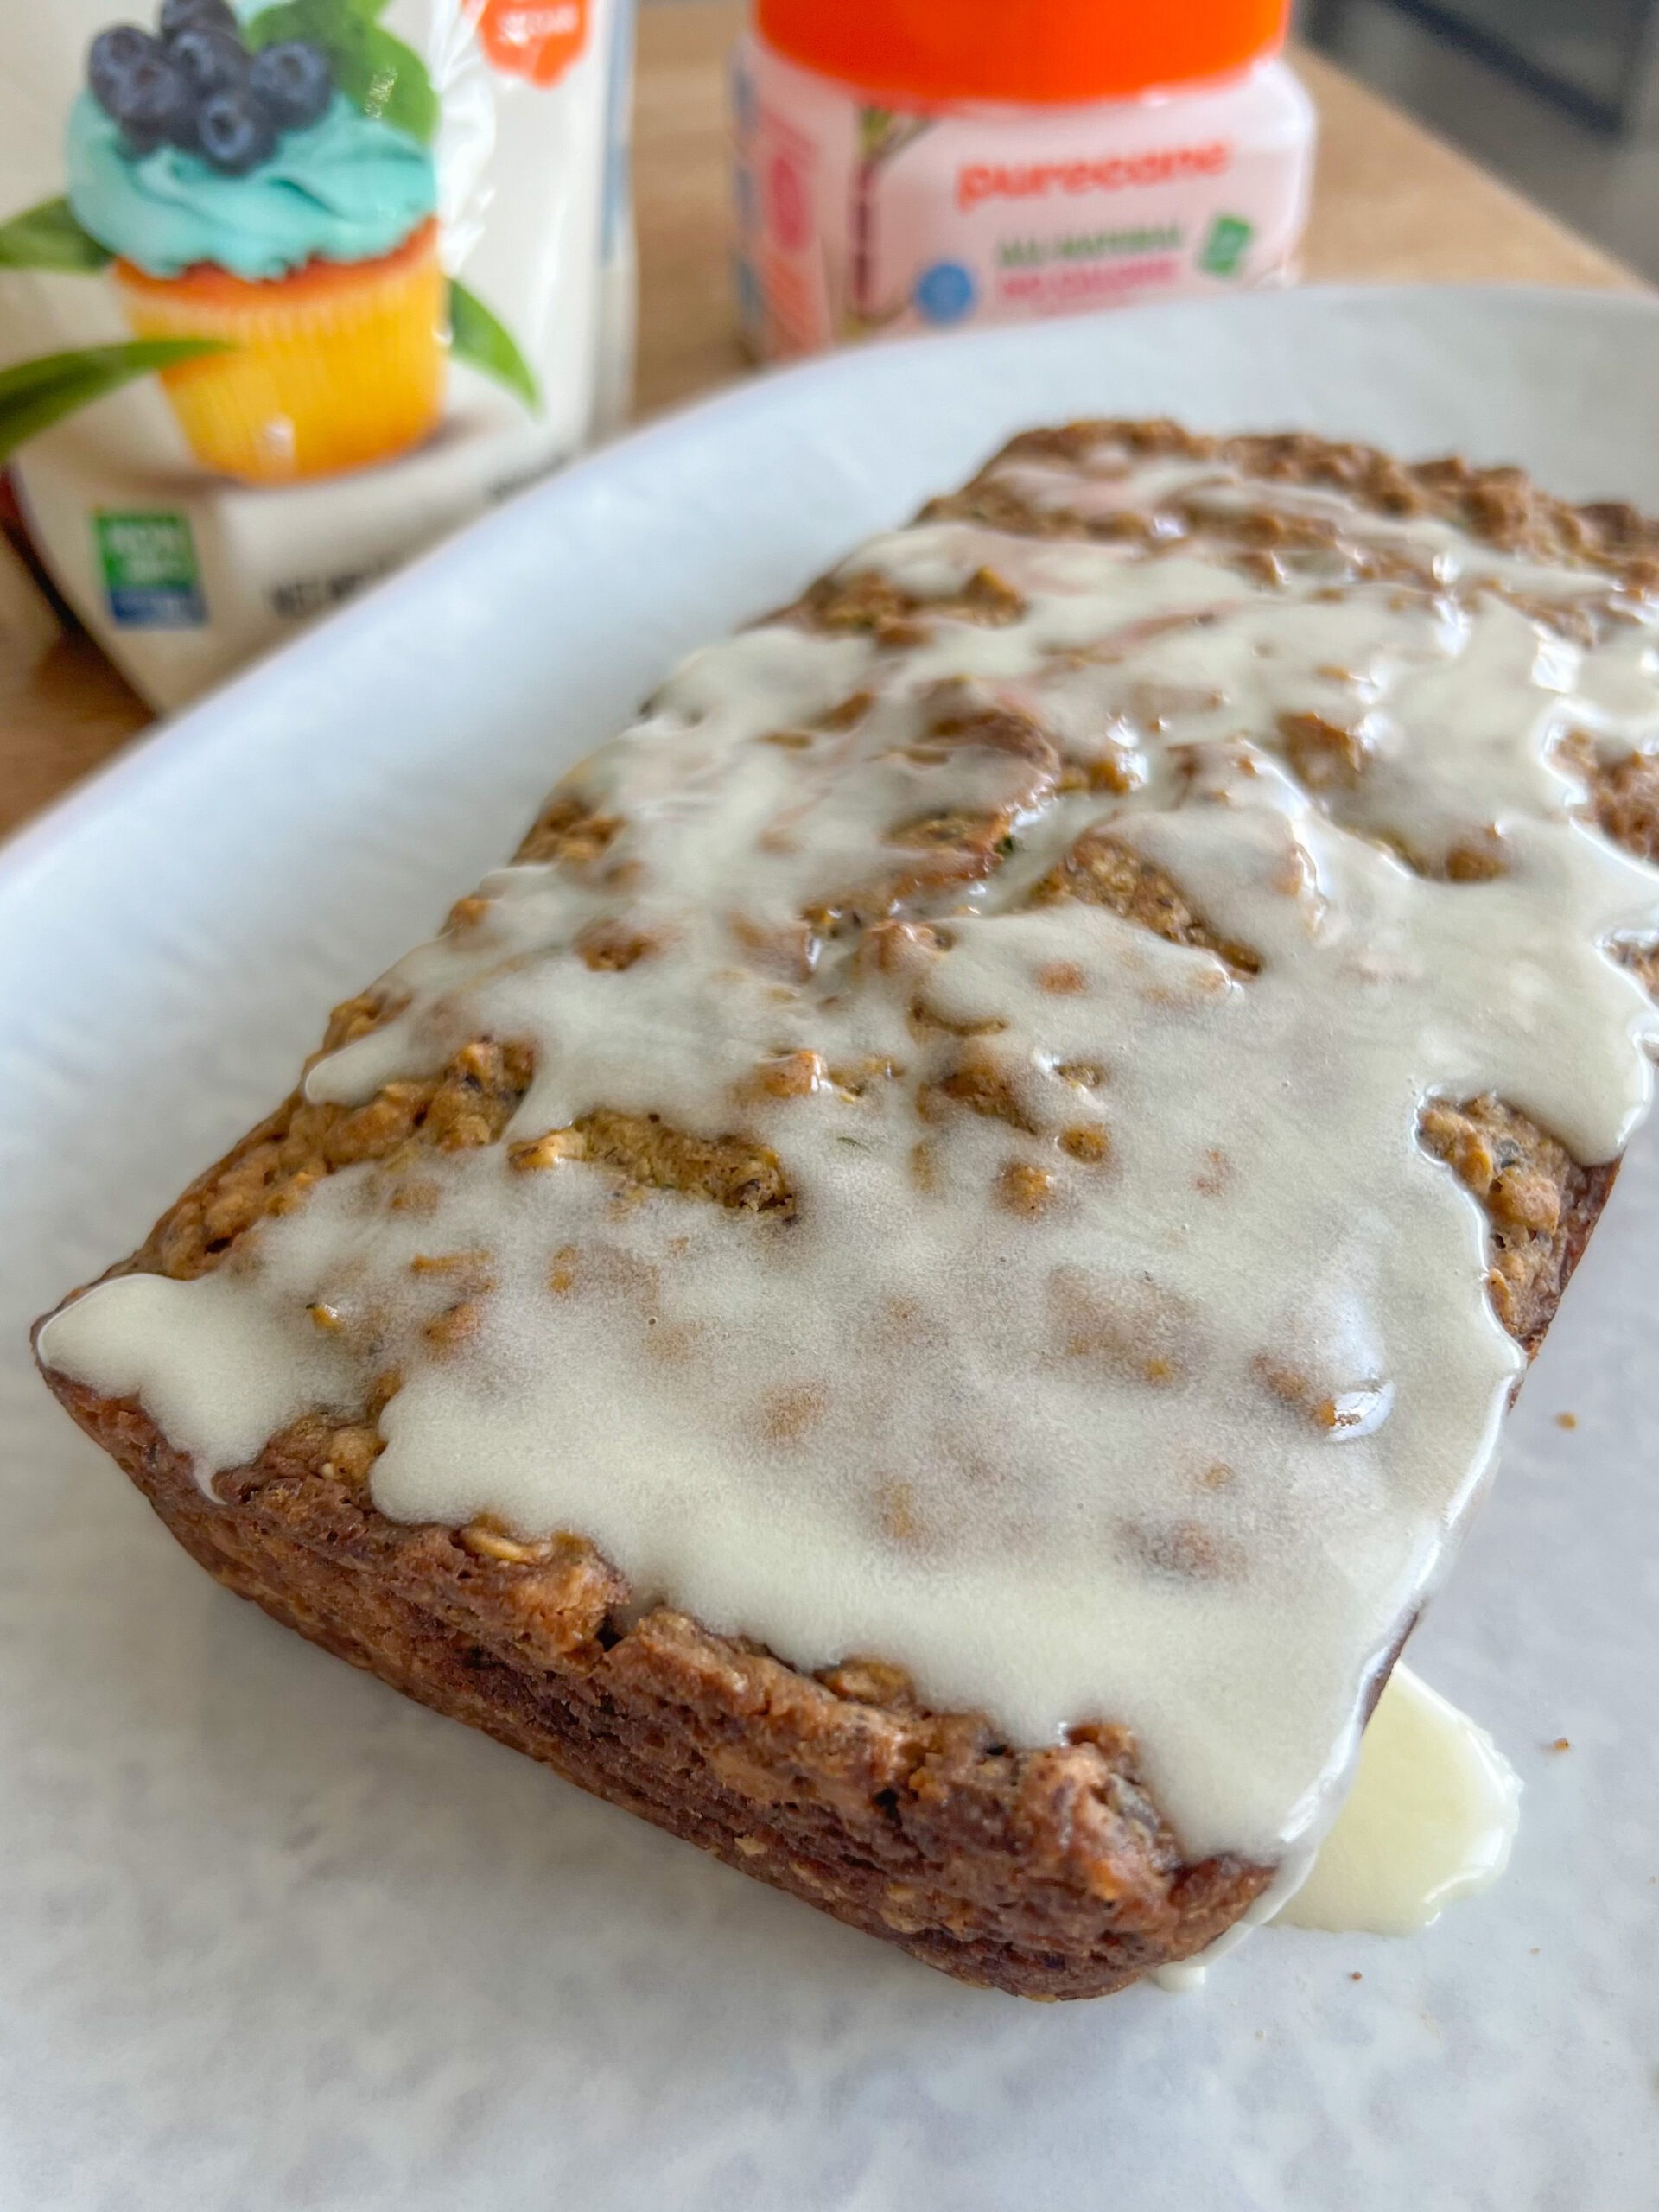 This easy and Healthy Zucchini Cake Recipe is the cross between a moist and delicious cake and a tasty zucchini bread. It's vegan and gluten-free friendly, deceptively healthy, and melt-in-your-mouth delicious!